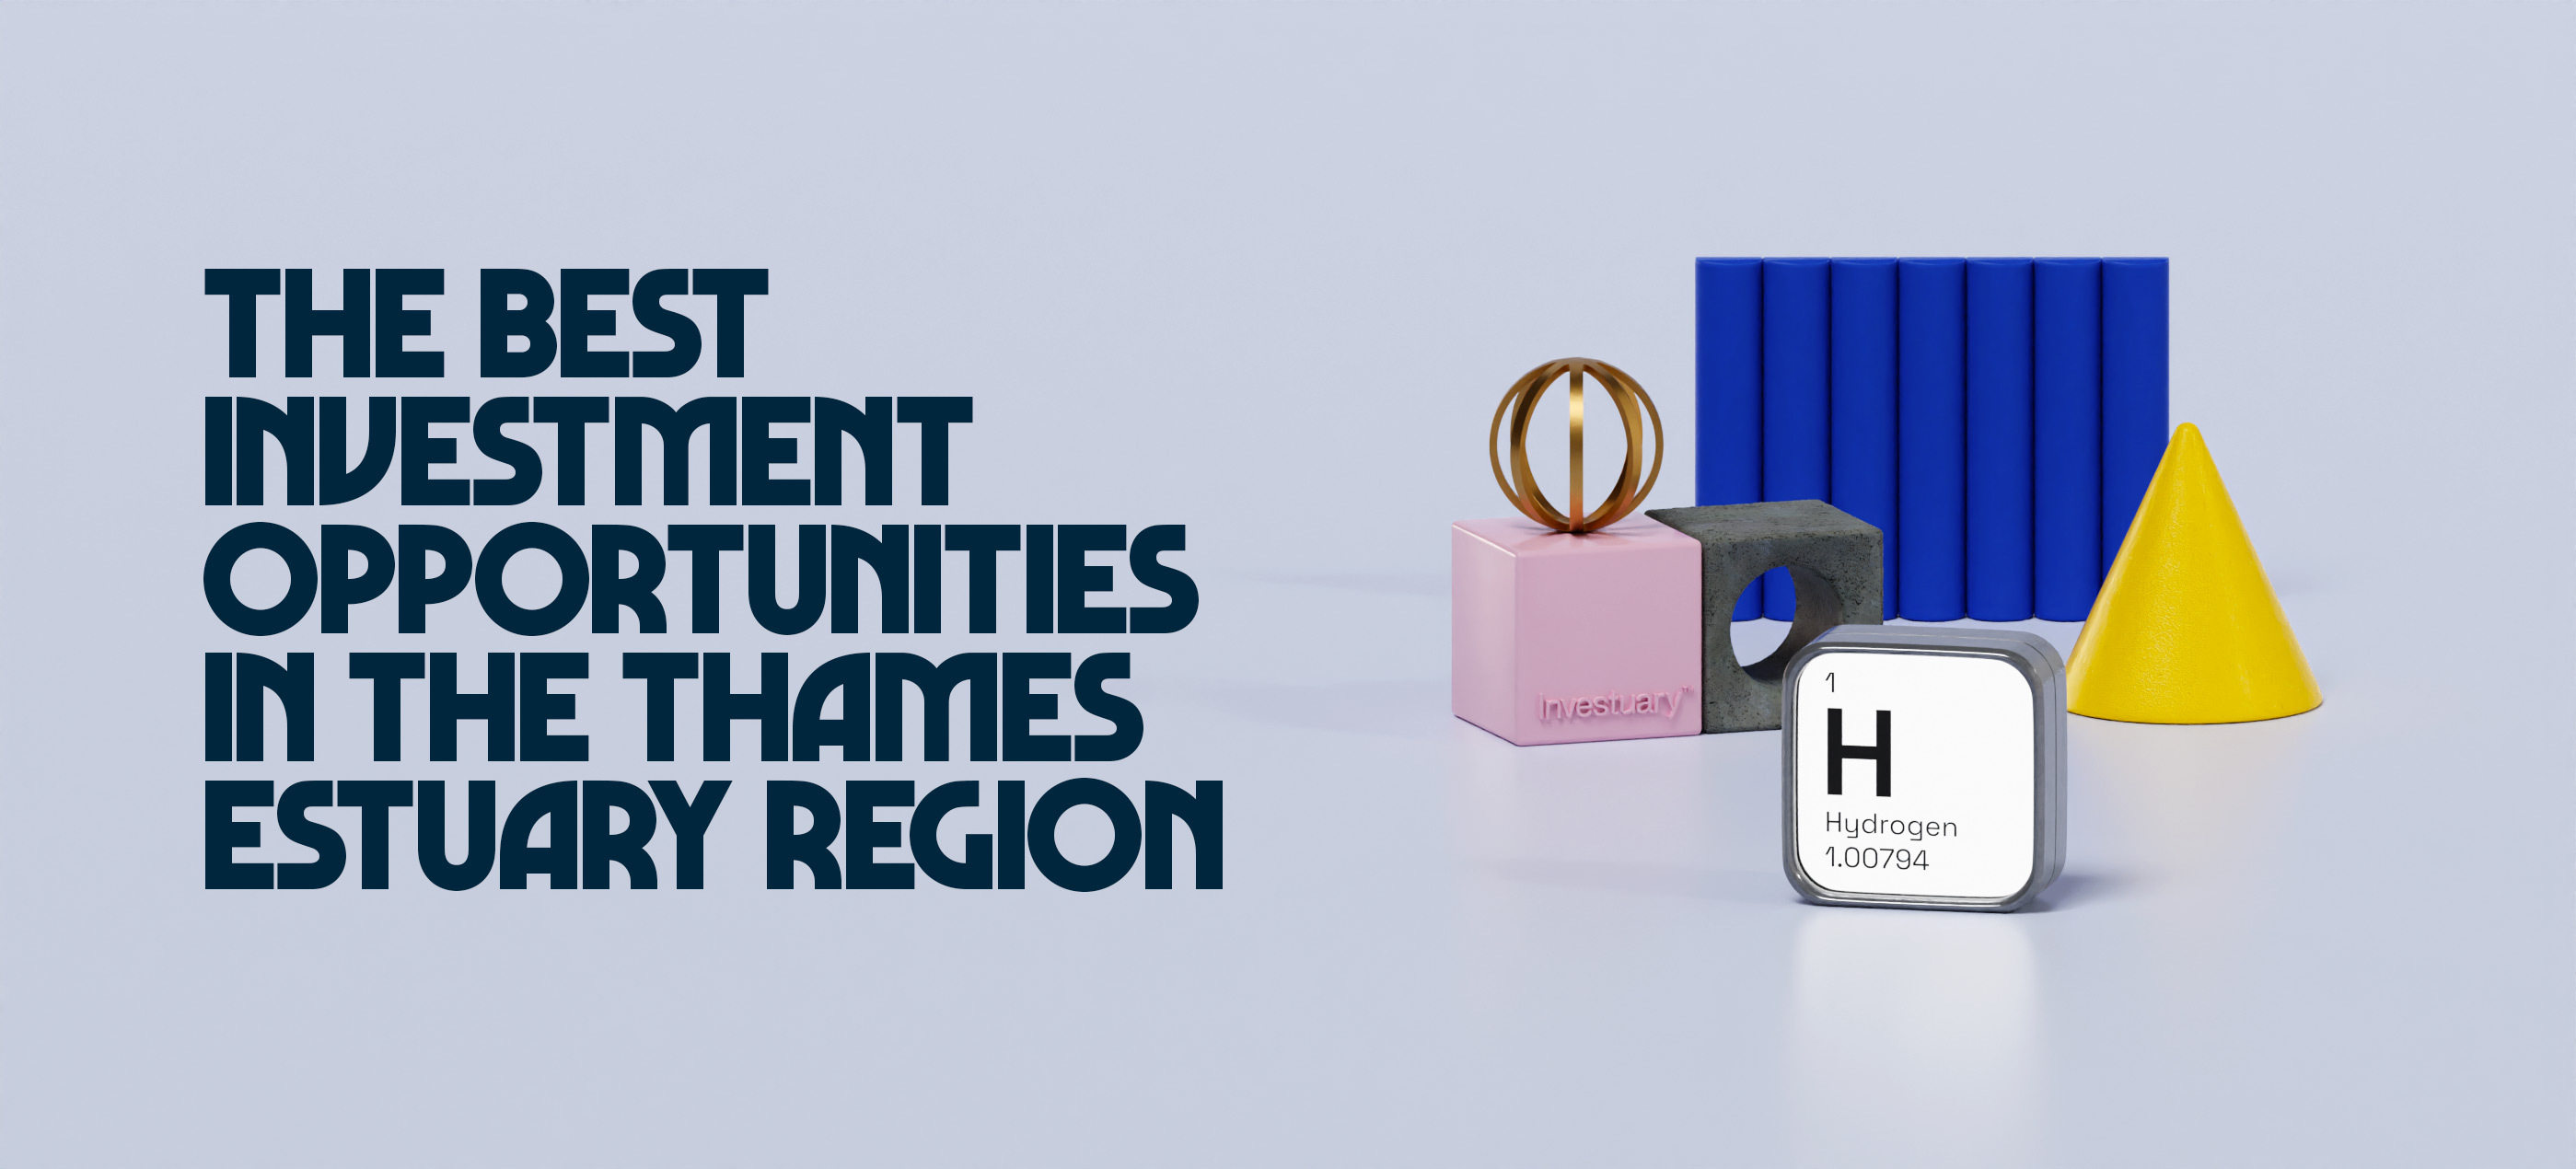 The best investment opportunities in the Thames Estuary region